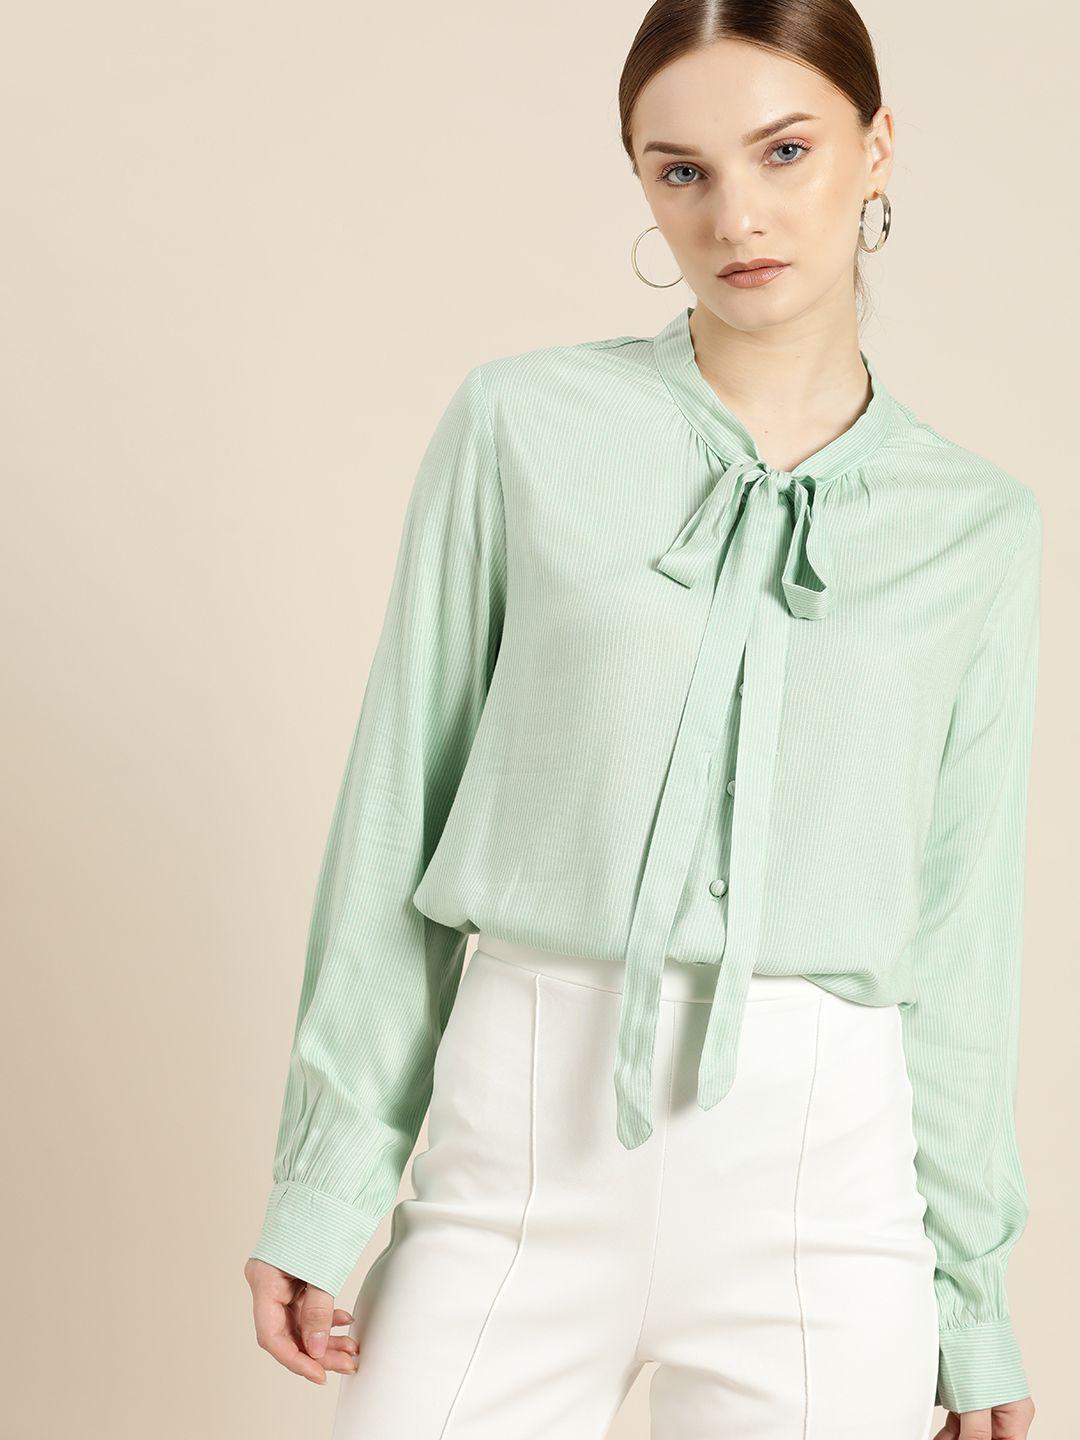 her by invictus green & white striped tie-up neck shirt style top